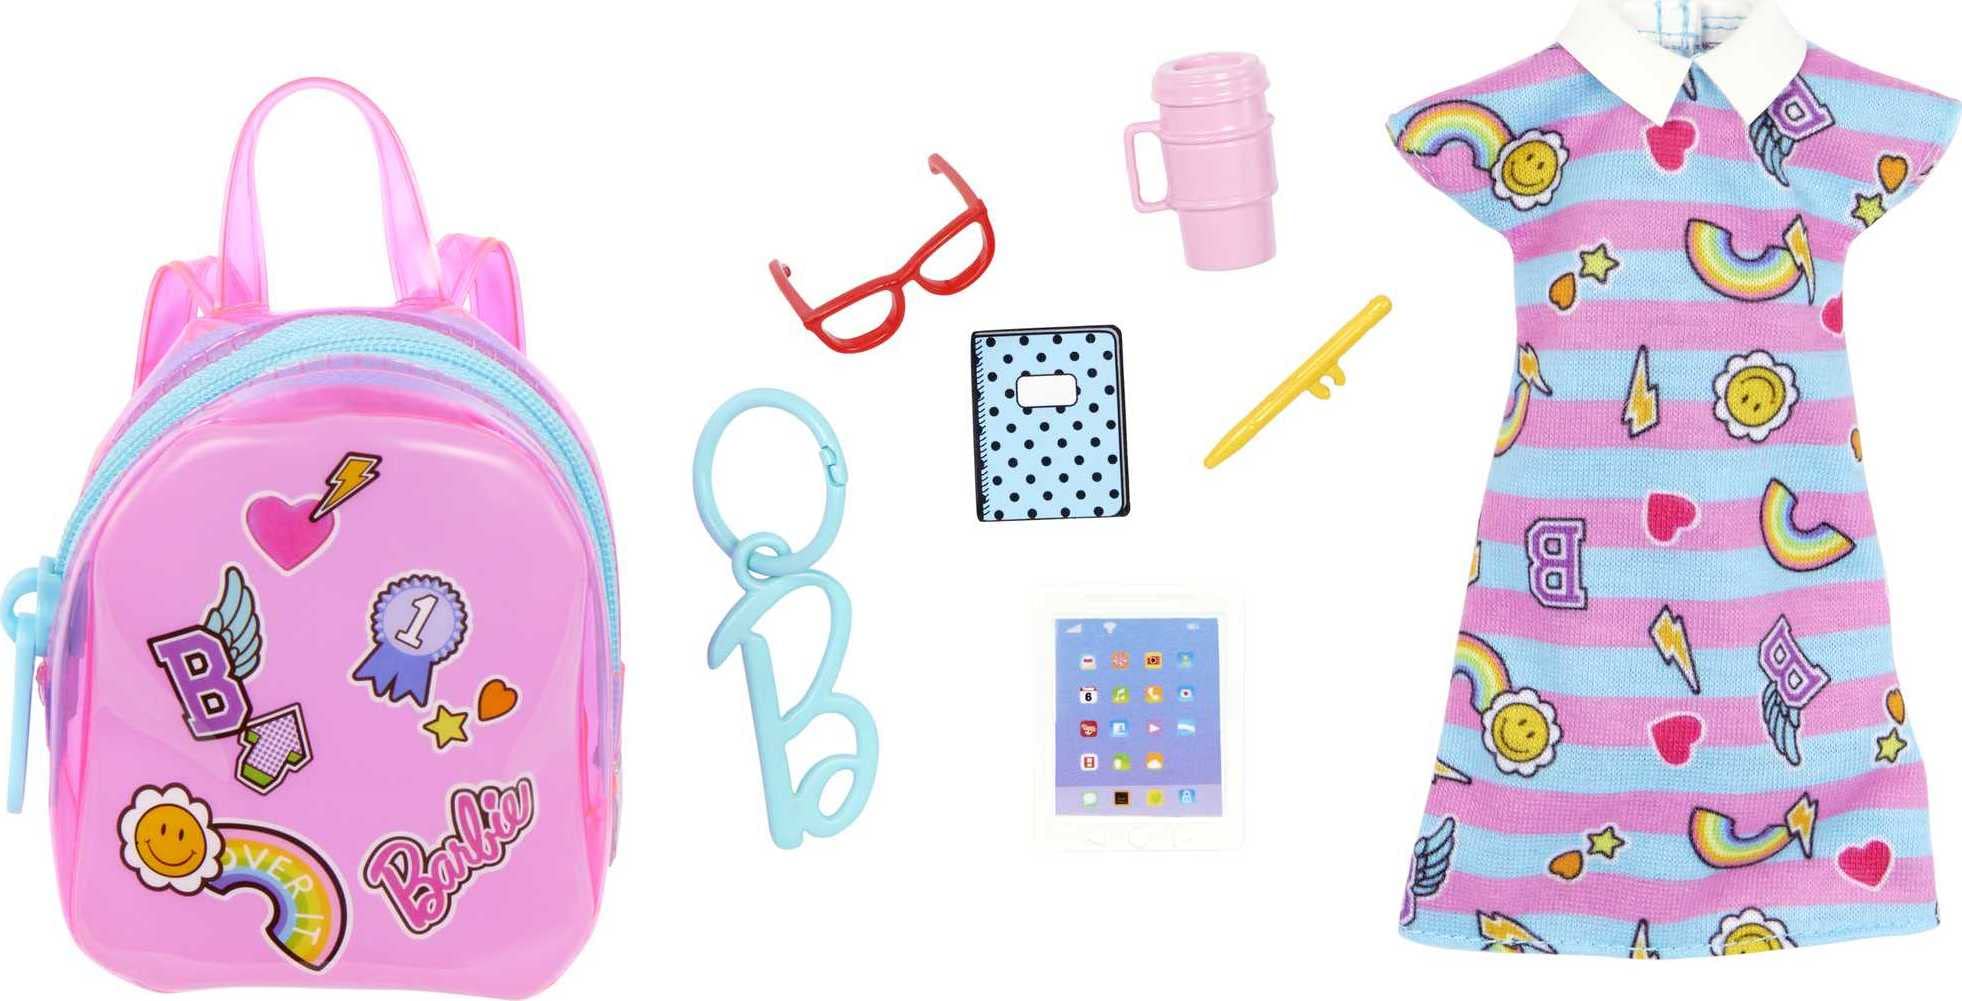 Barbie Clothes, Deluxe Clip-On Bag with School Outfit and Five Themed Accessories for Barbie Dolls